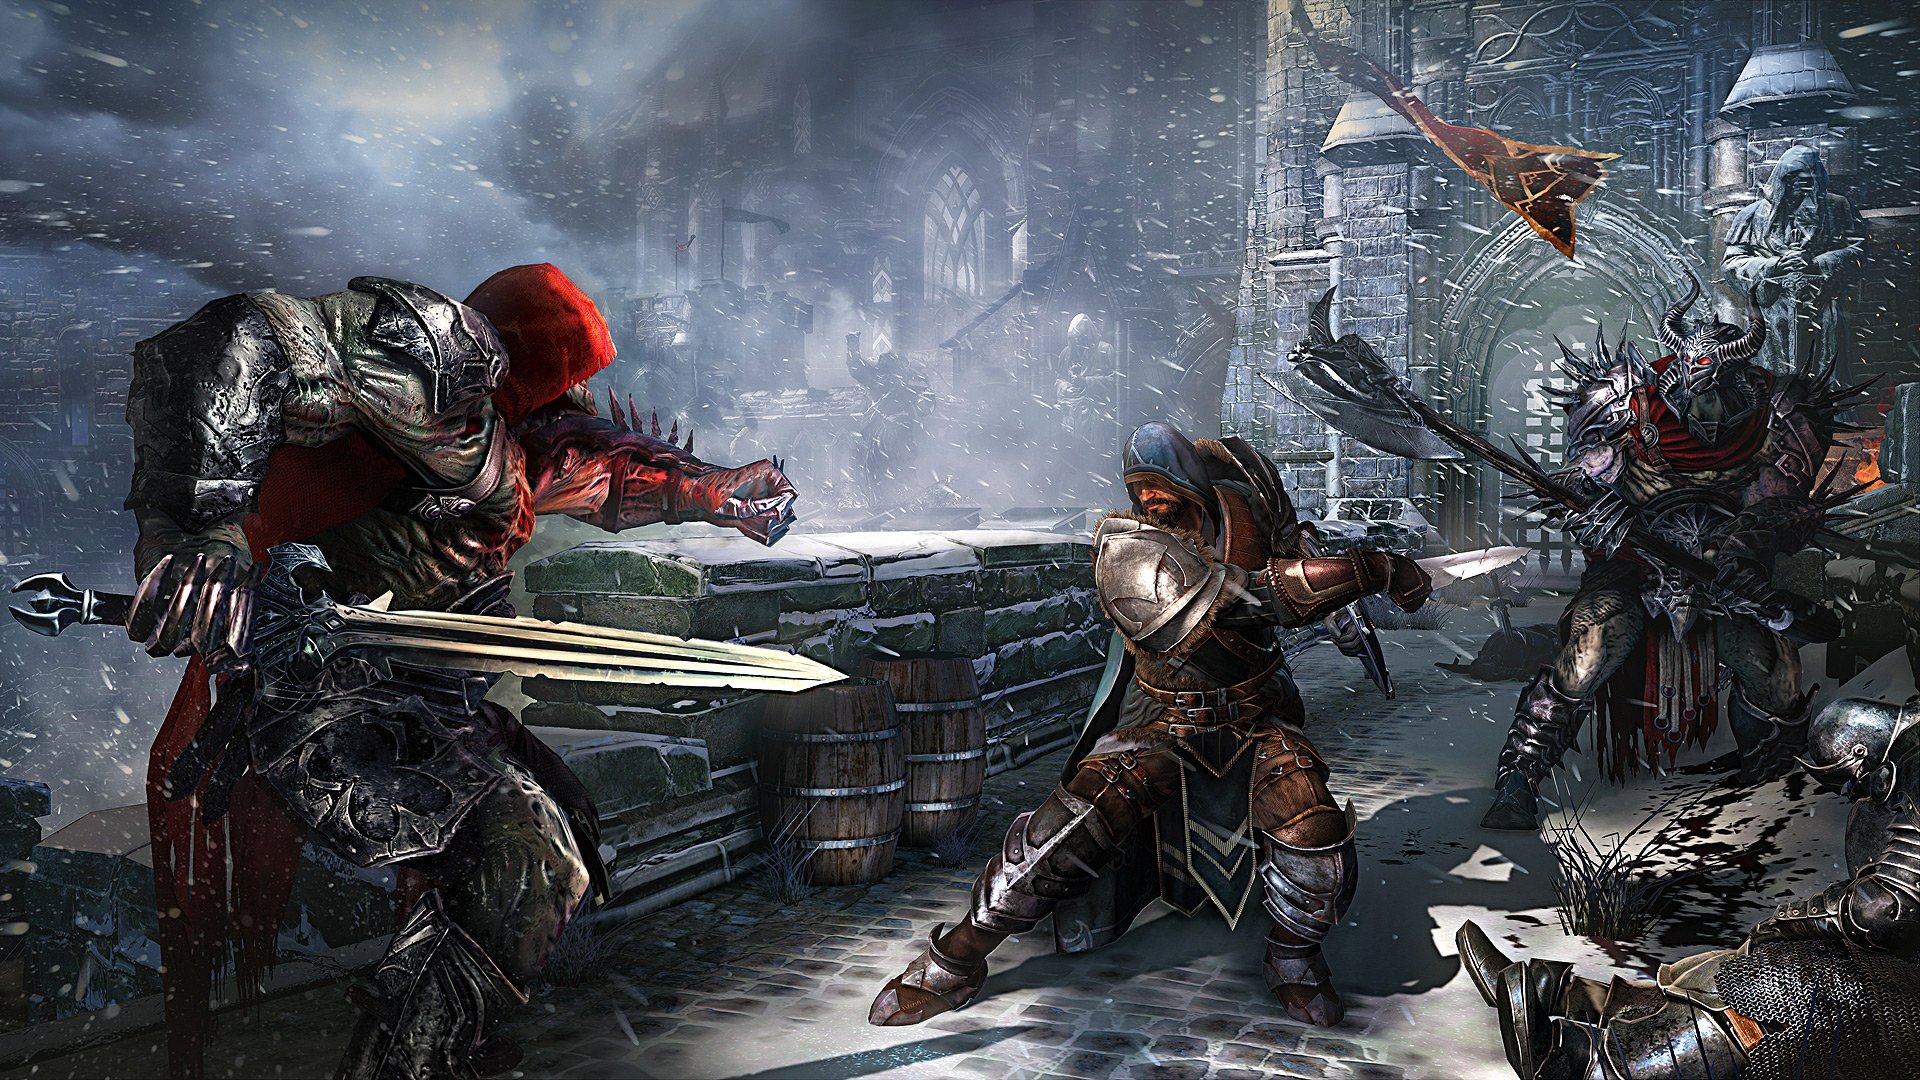 Скриншот 1 к игре Lords of the Fallen Game of the Year Edition v1.0.0 [GOG] (2014)